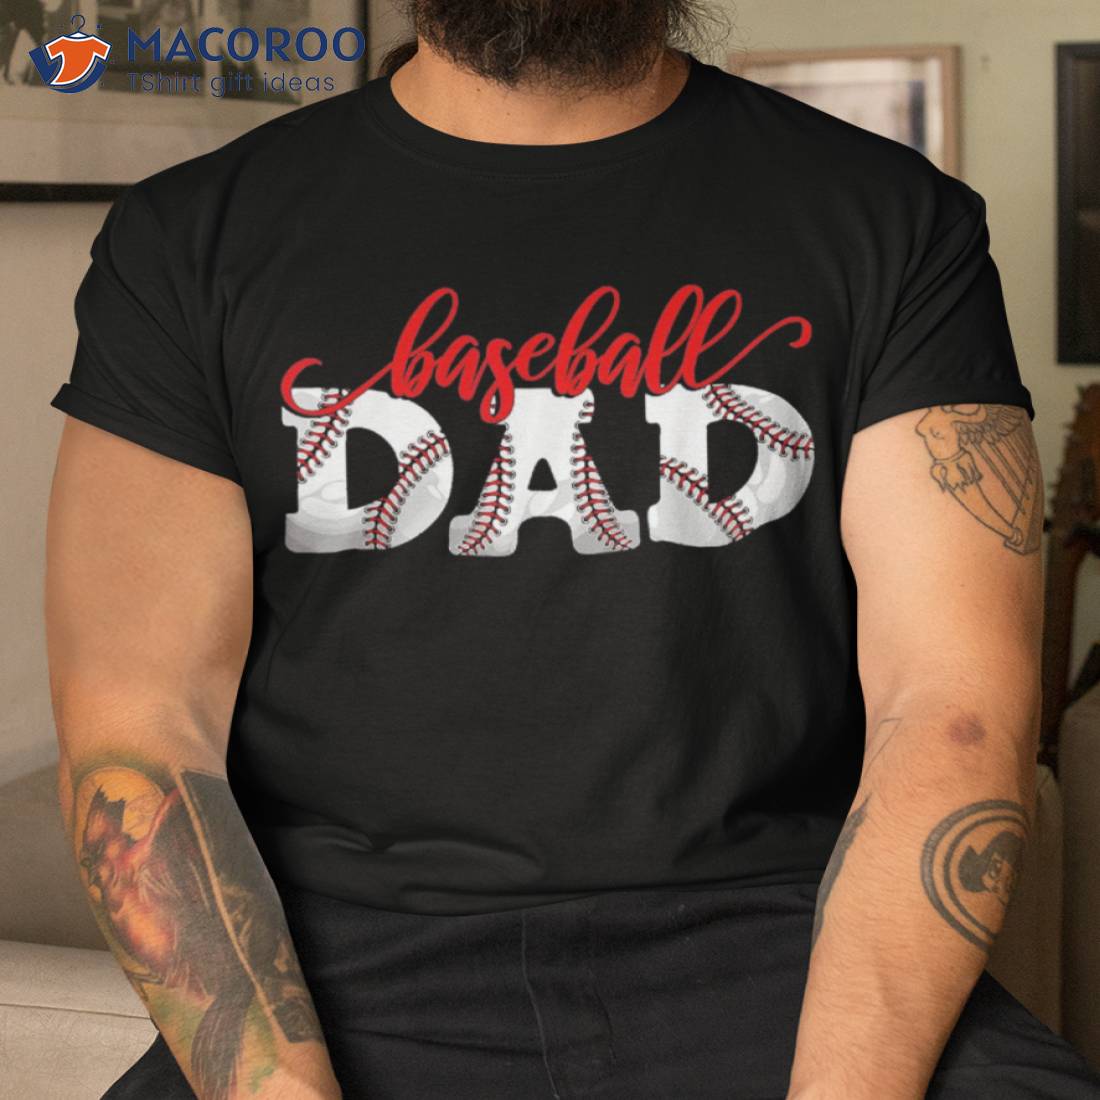 Baseball Dad Sports Fan Kids Exciting Father Parents Love Shirt